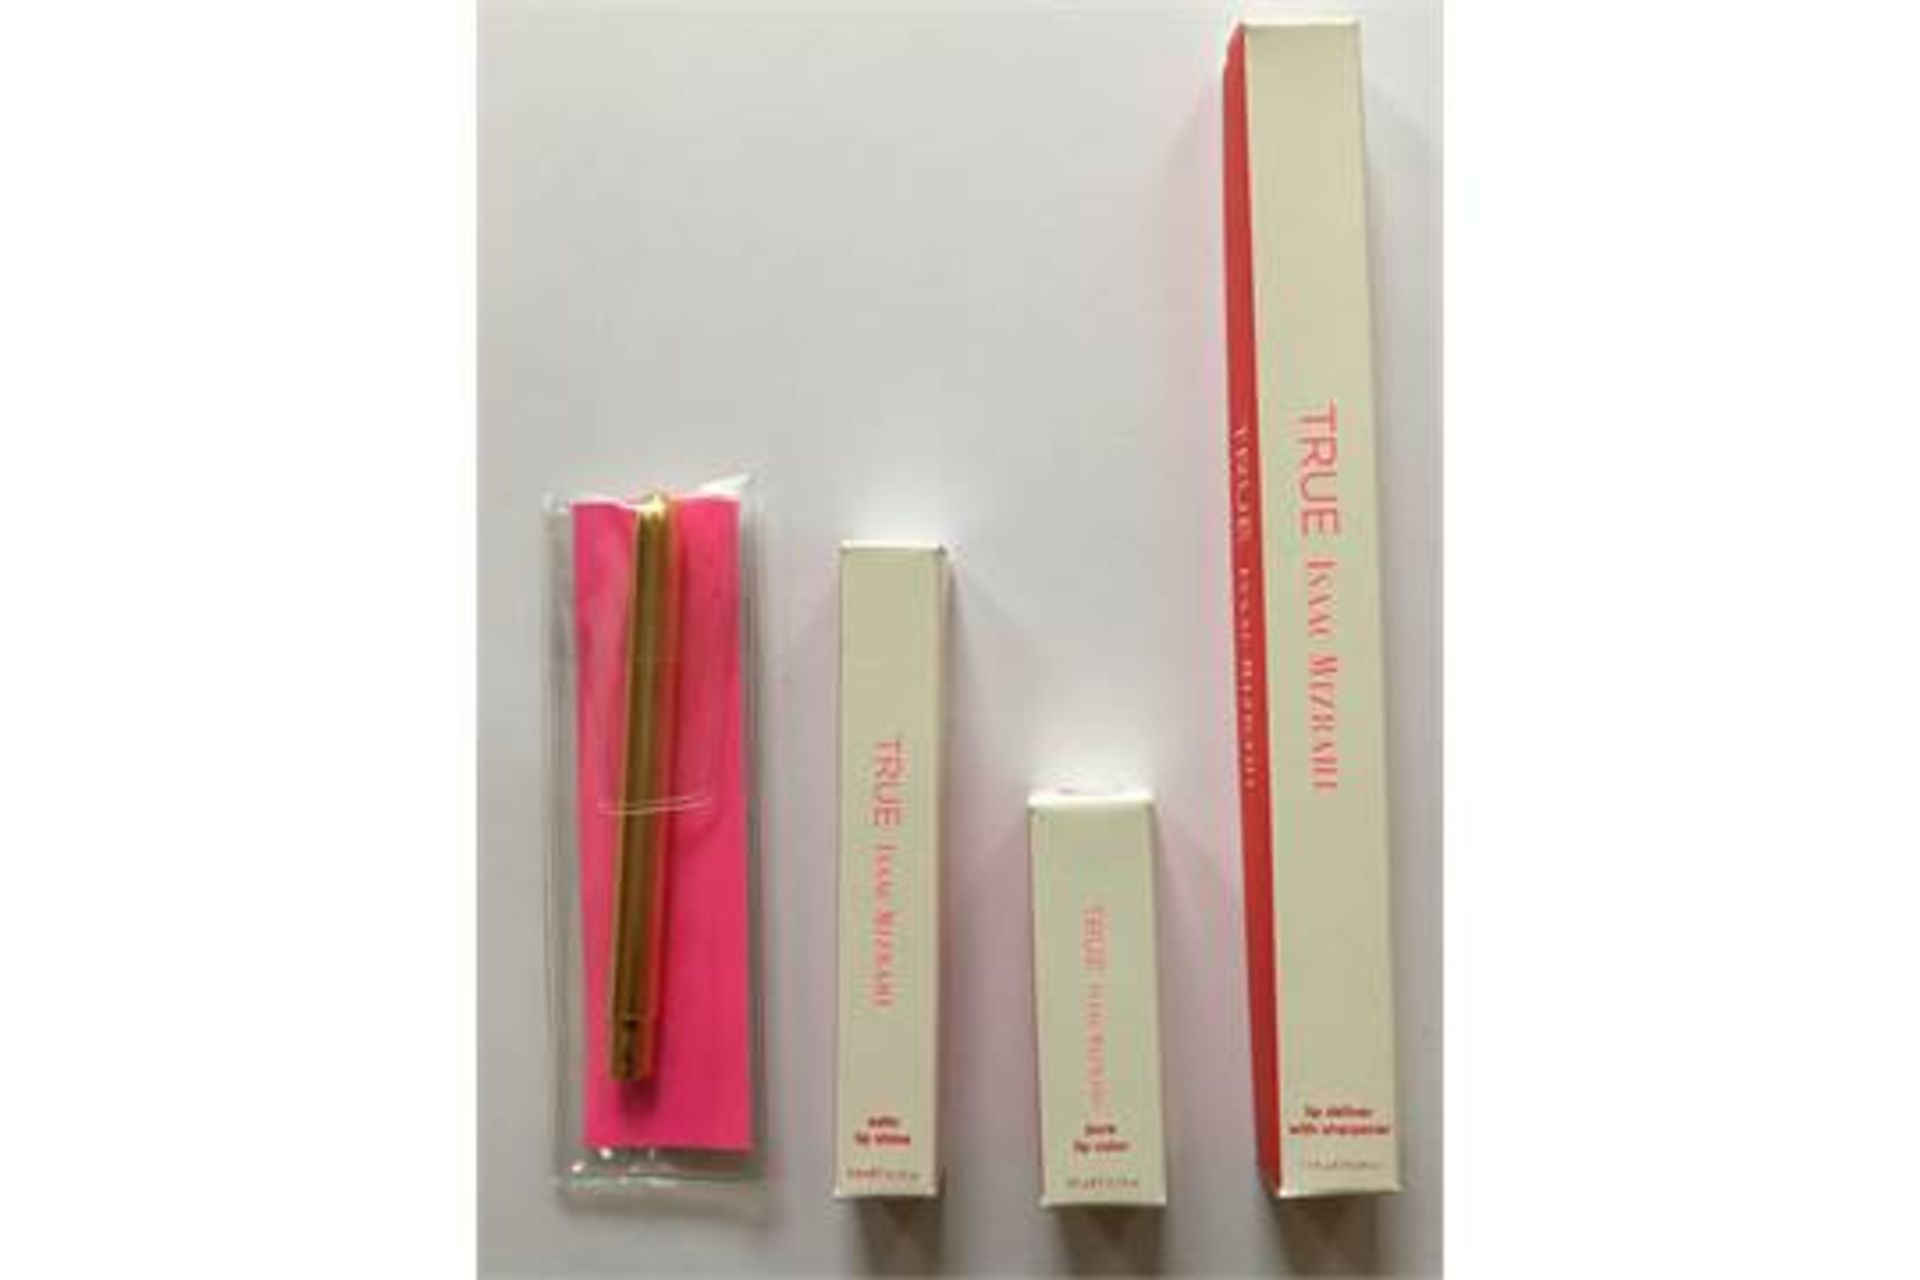 100 x True by Issac Mizrahi – 4 Gift Item Set RRP £60 per set Each set is individually packed in a